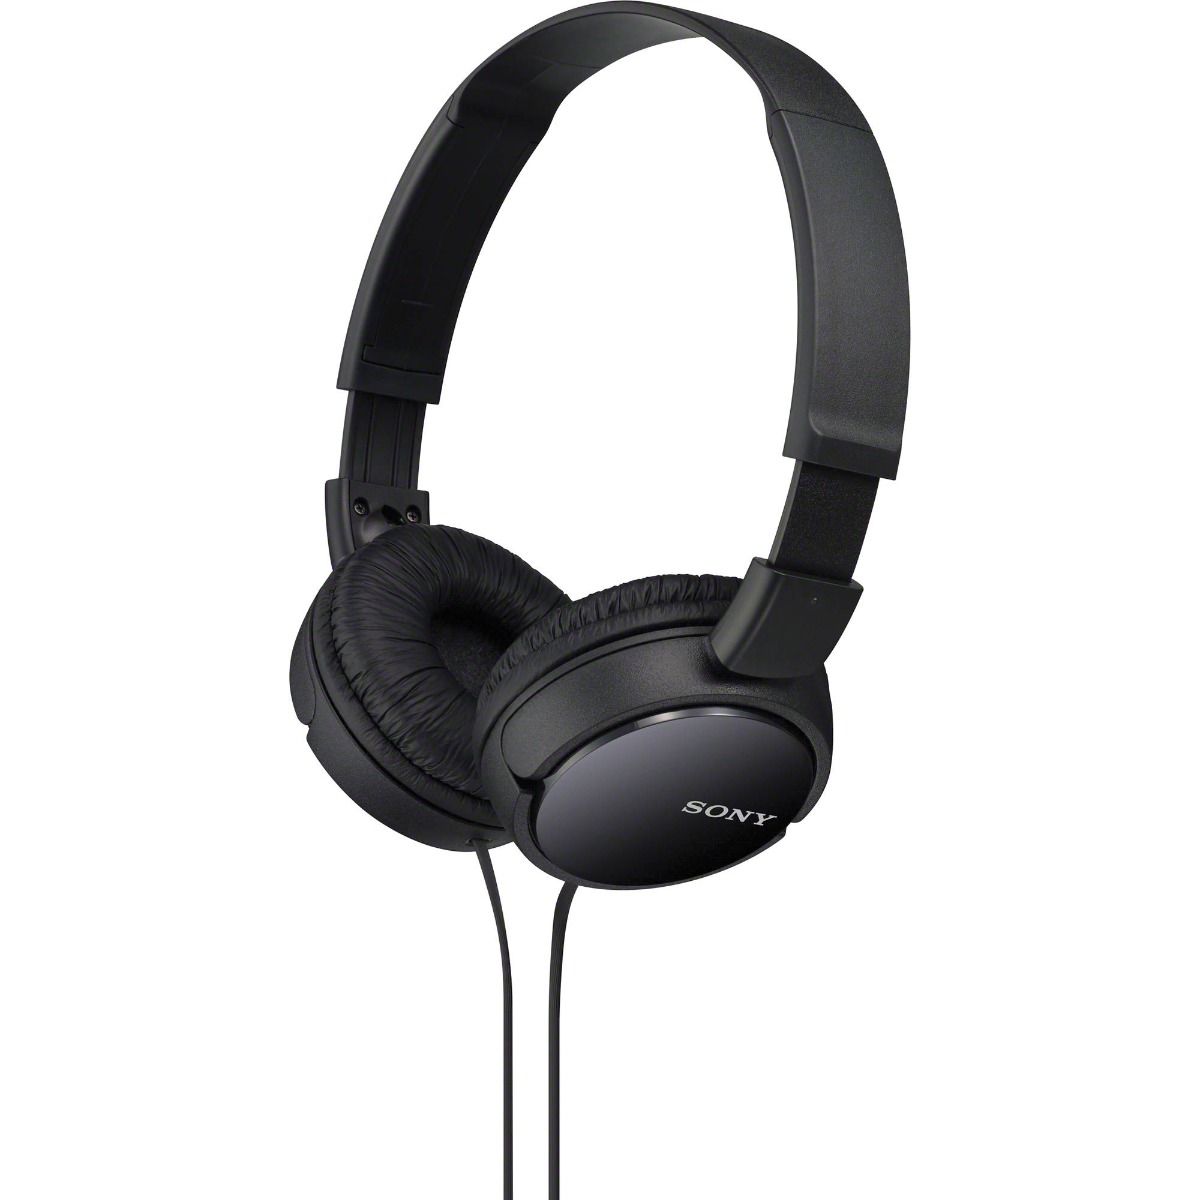 Sony On Ear Wired Headphones with Microphone, Black - MDR-ZX110AP/B